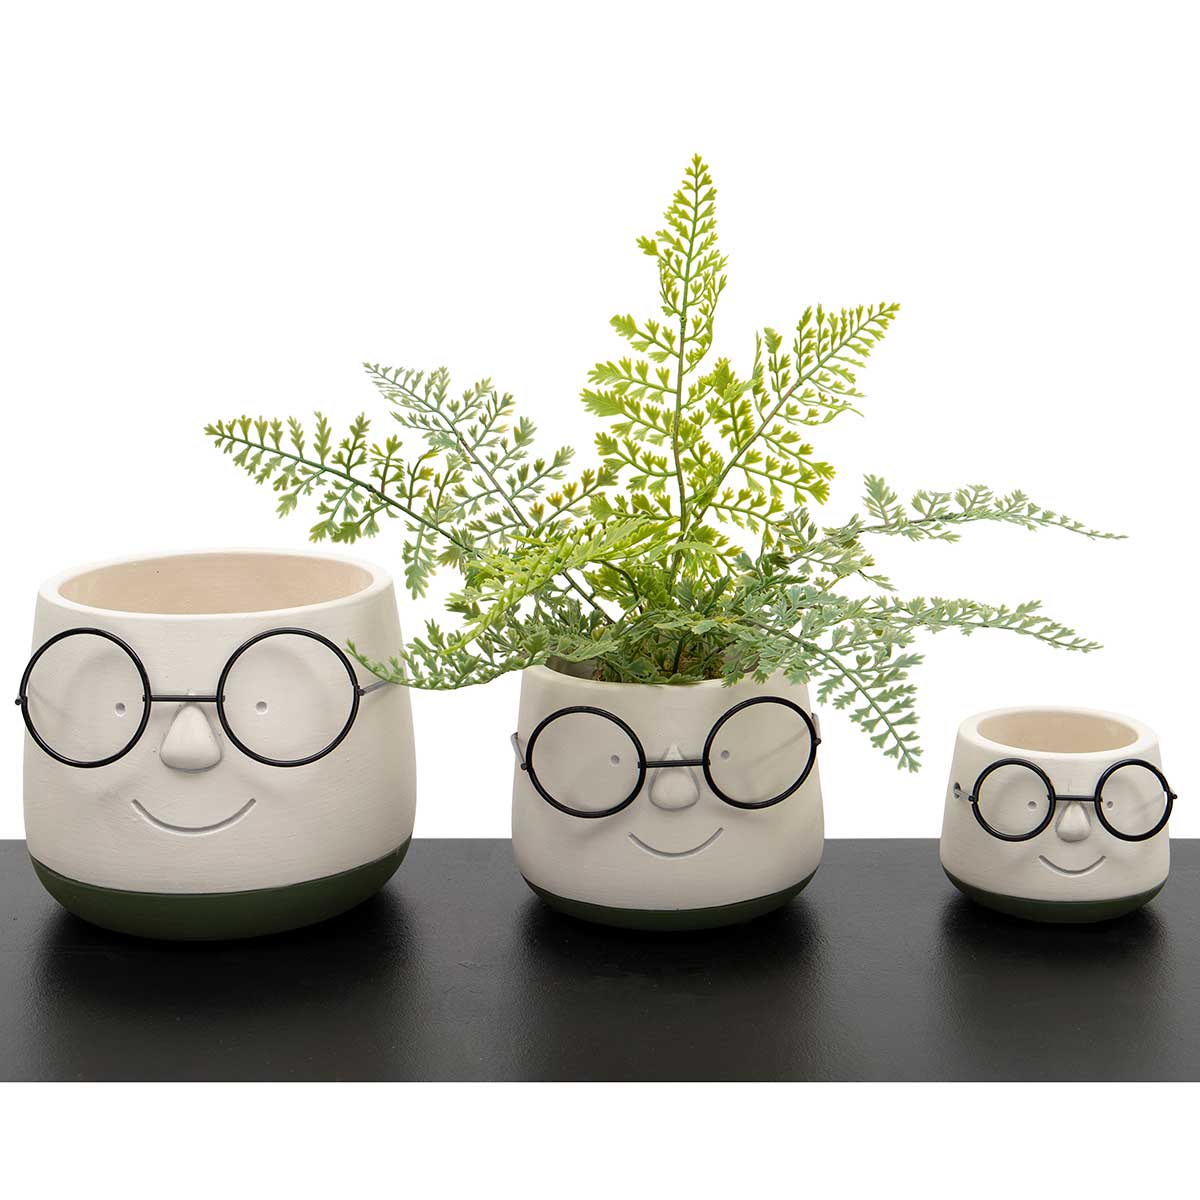 POT POINDEXTER MEDIUM 5IN X 4IN WHITE/GREEN FACE/WIRE GLASSES - Click Image to Close